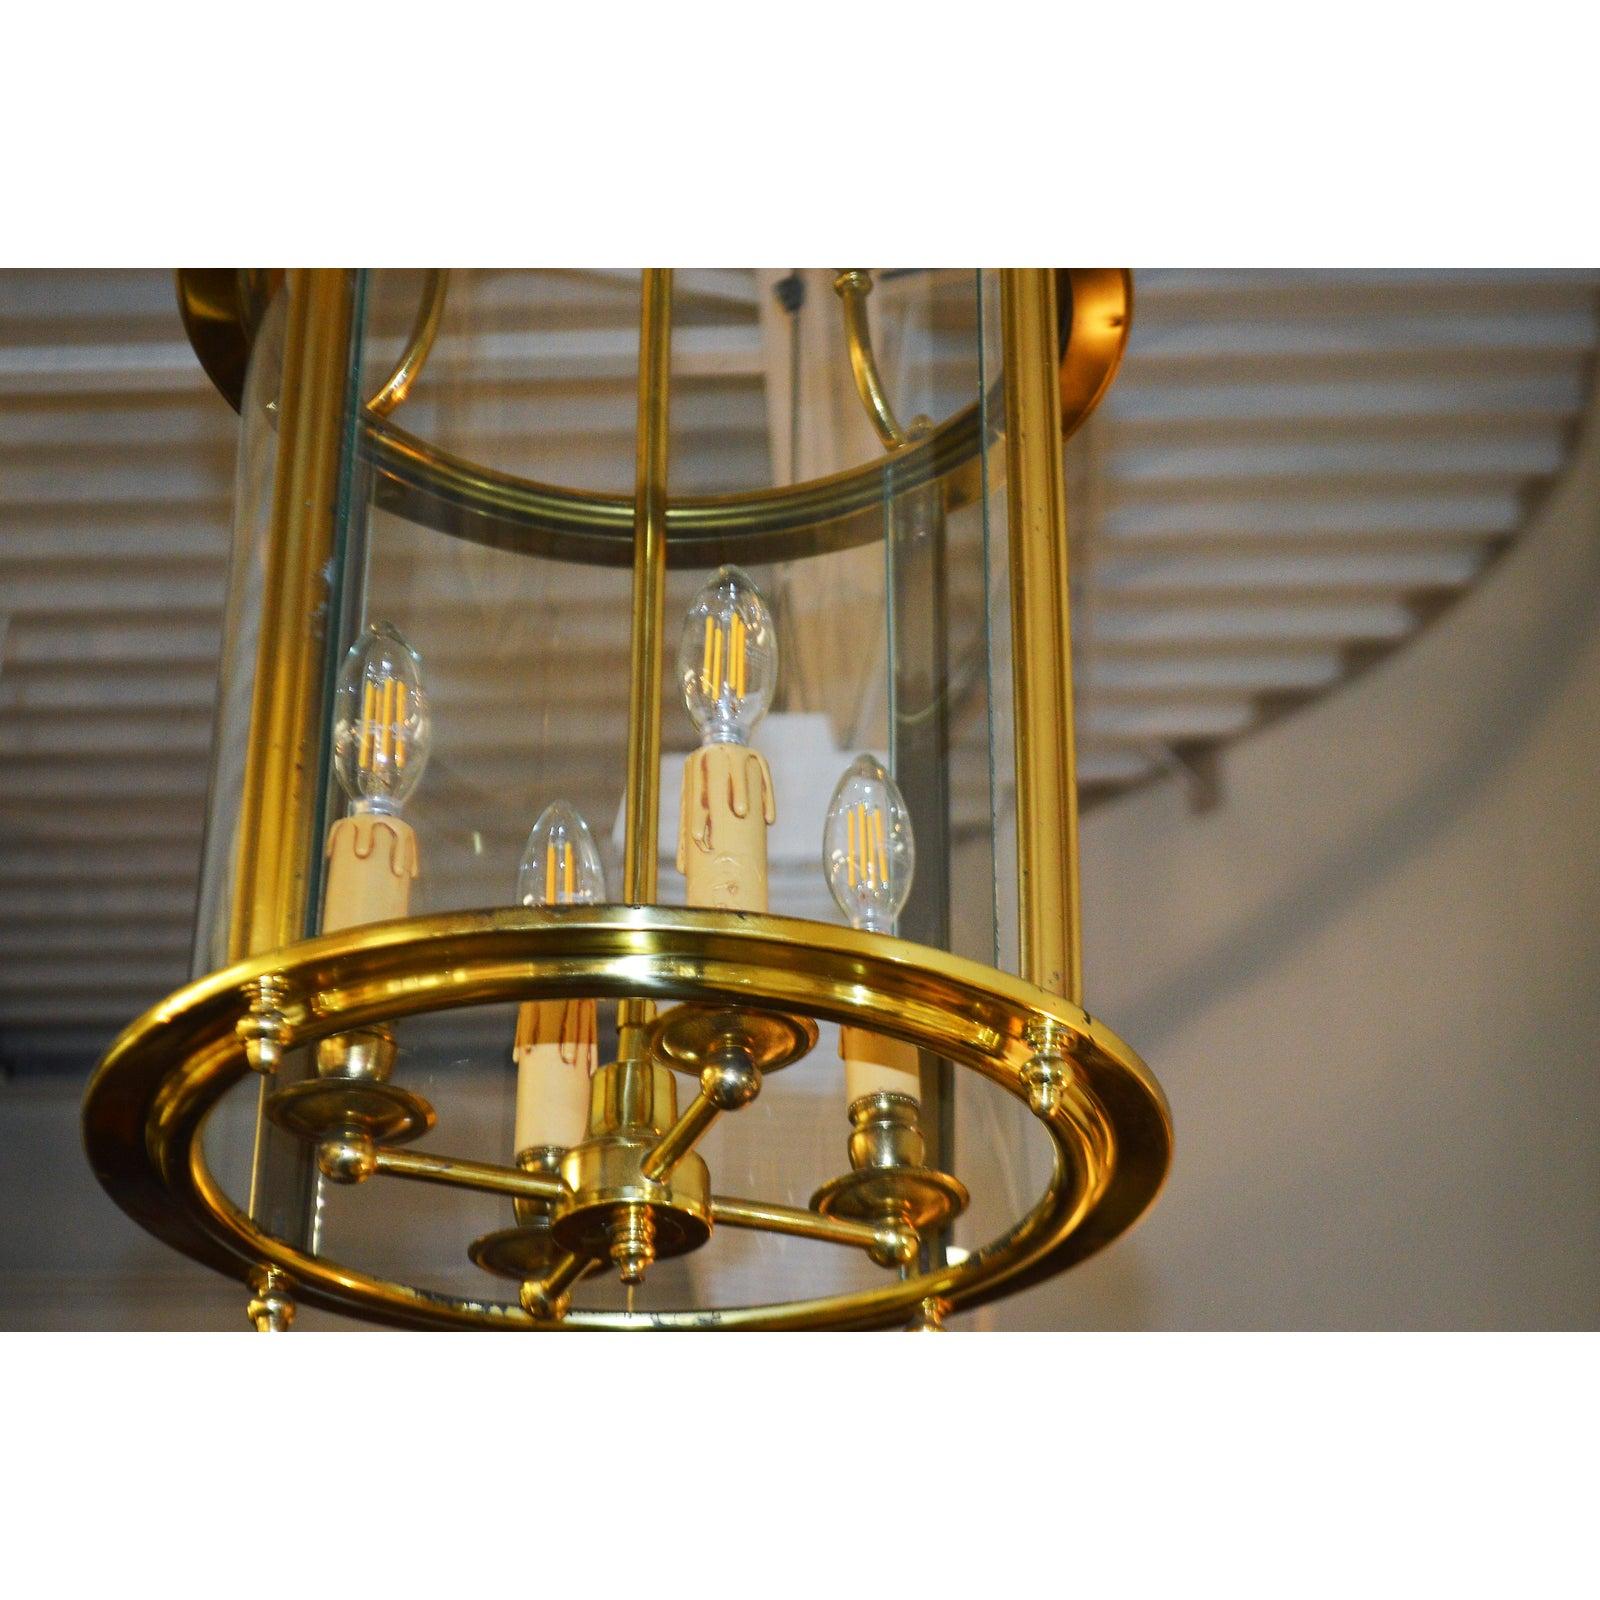 Solid brass lantern has the original glass cage in excellent condition. The drip candle holders are original and in excellent condition as well. The height is 27